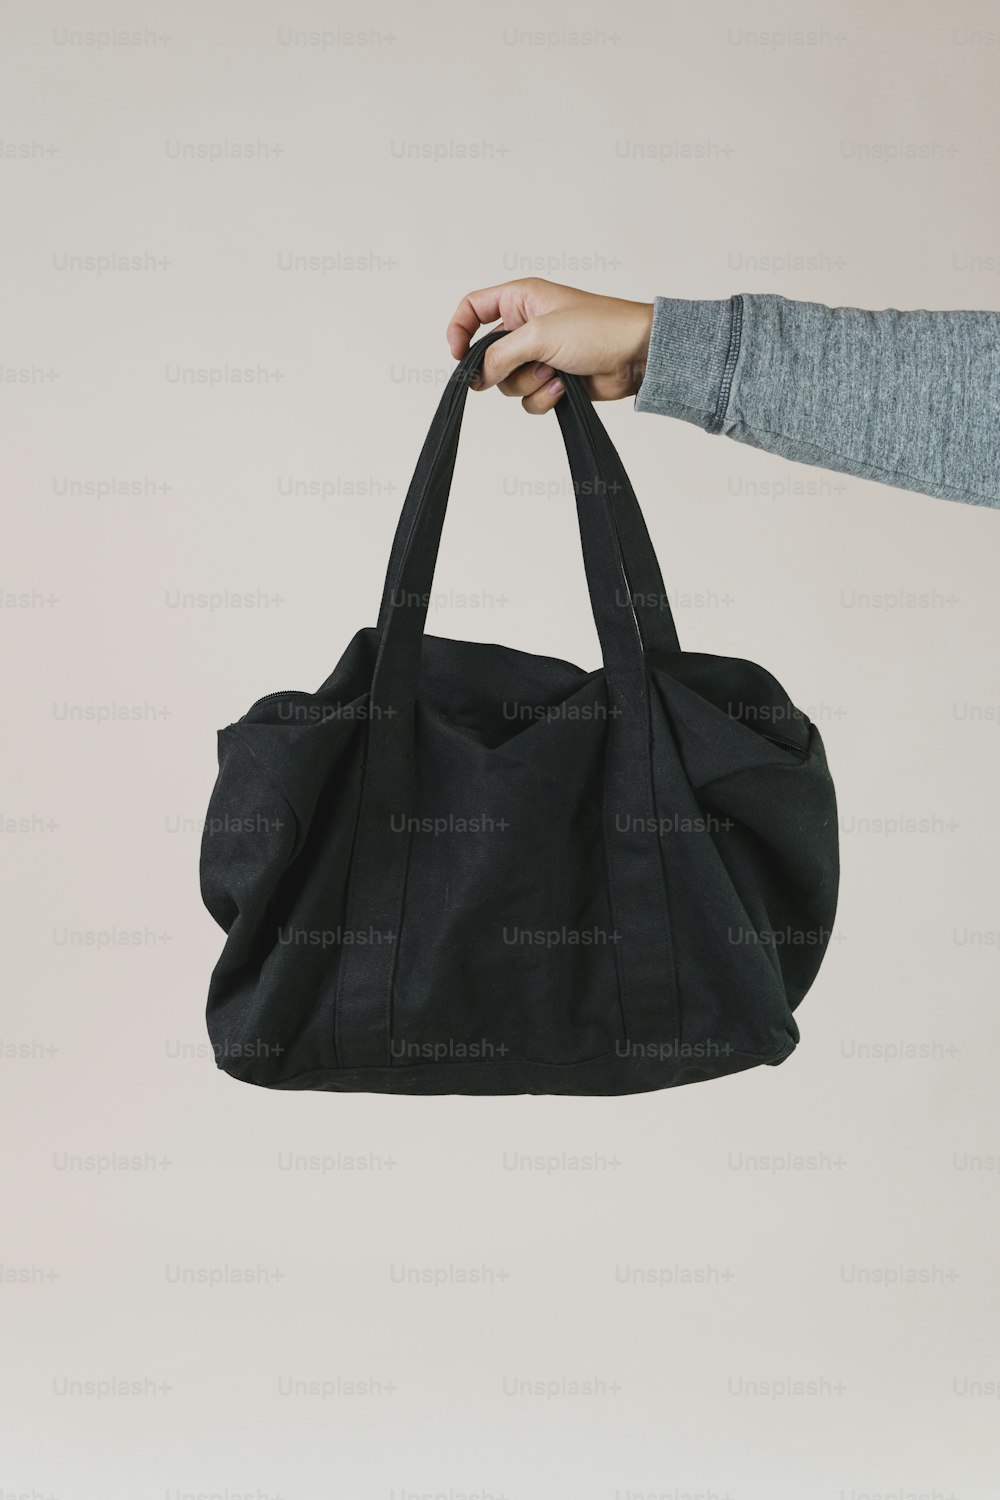 a person holding a black bag in their hand